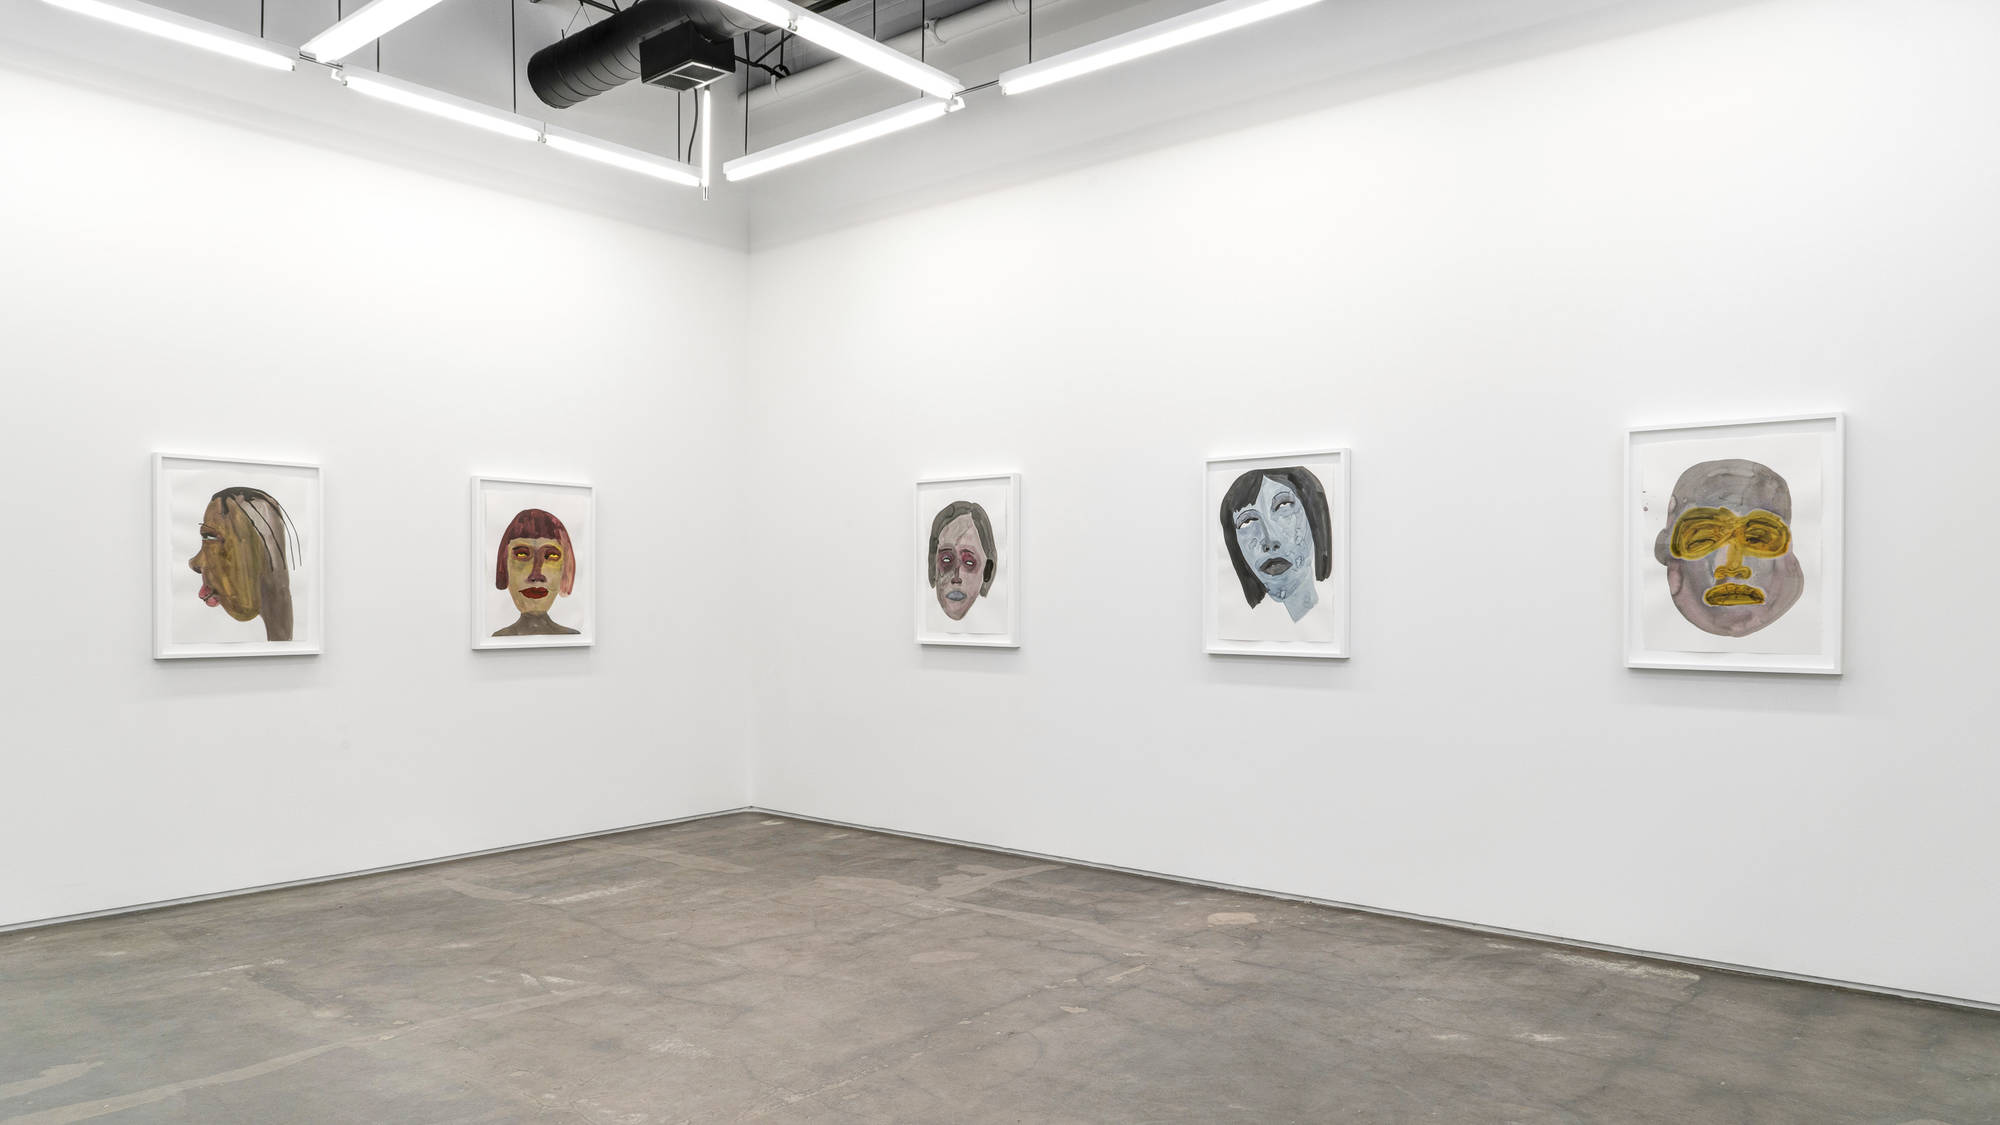 Featured Image: Work by February James. We Laugh Loud So The Spirits Can Hear, 2020. Installation view. Five highly expressive, framed watercolor portraits hang in the gallery. Image Courtesy of the artist and Monique Meloche Gallery.